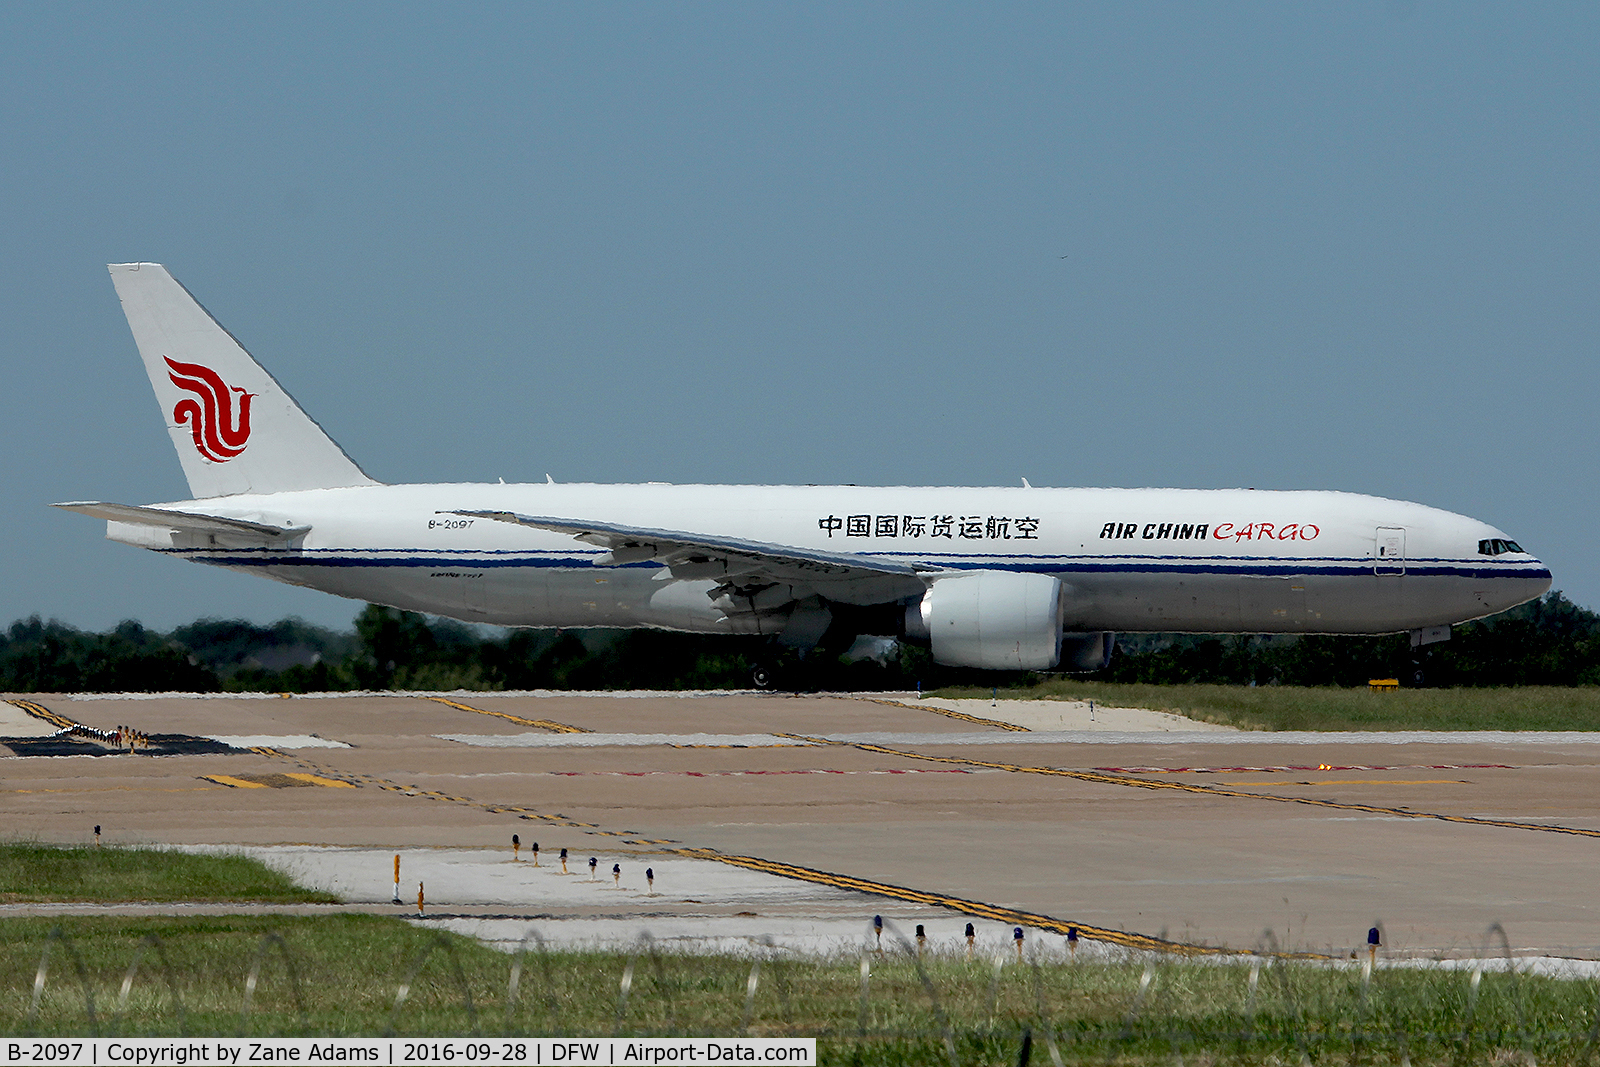 B-2097, 2014 Boeing 777-FFT C/N 44680, Arriving at DFW Airport